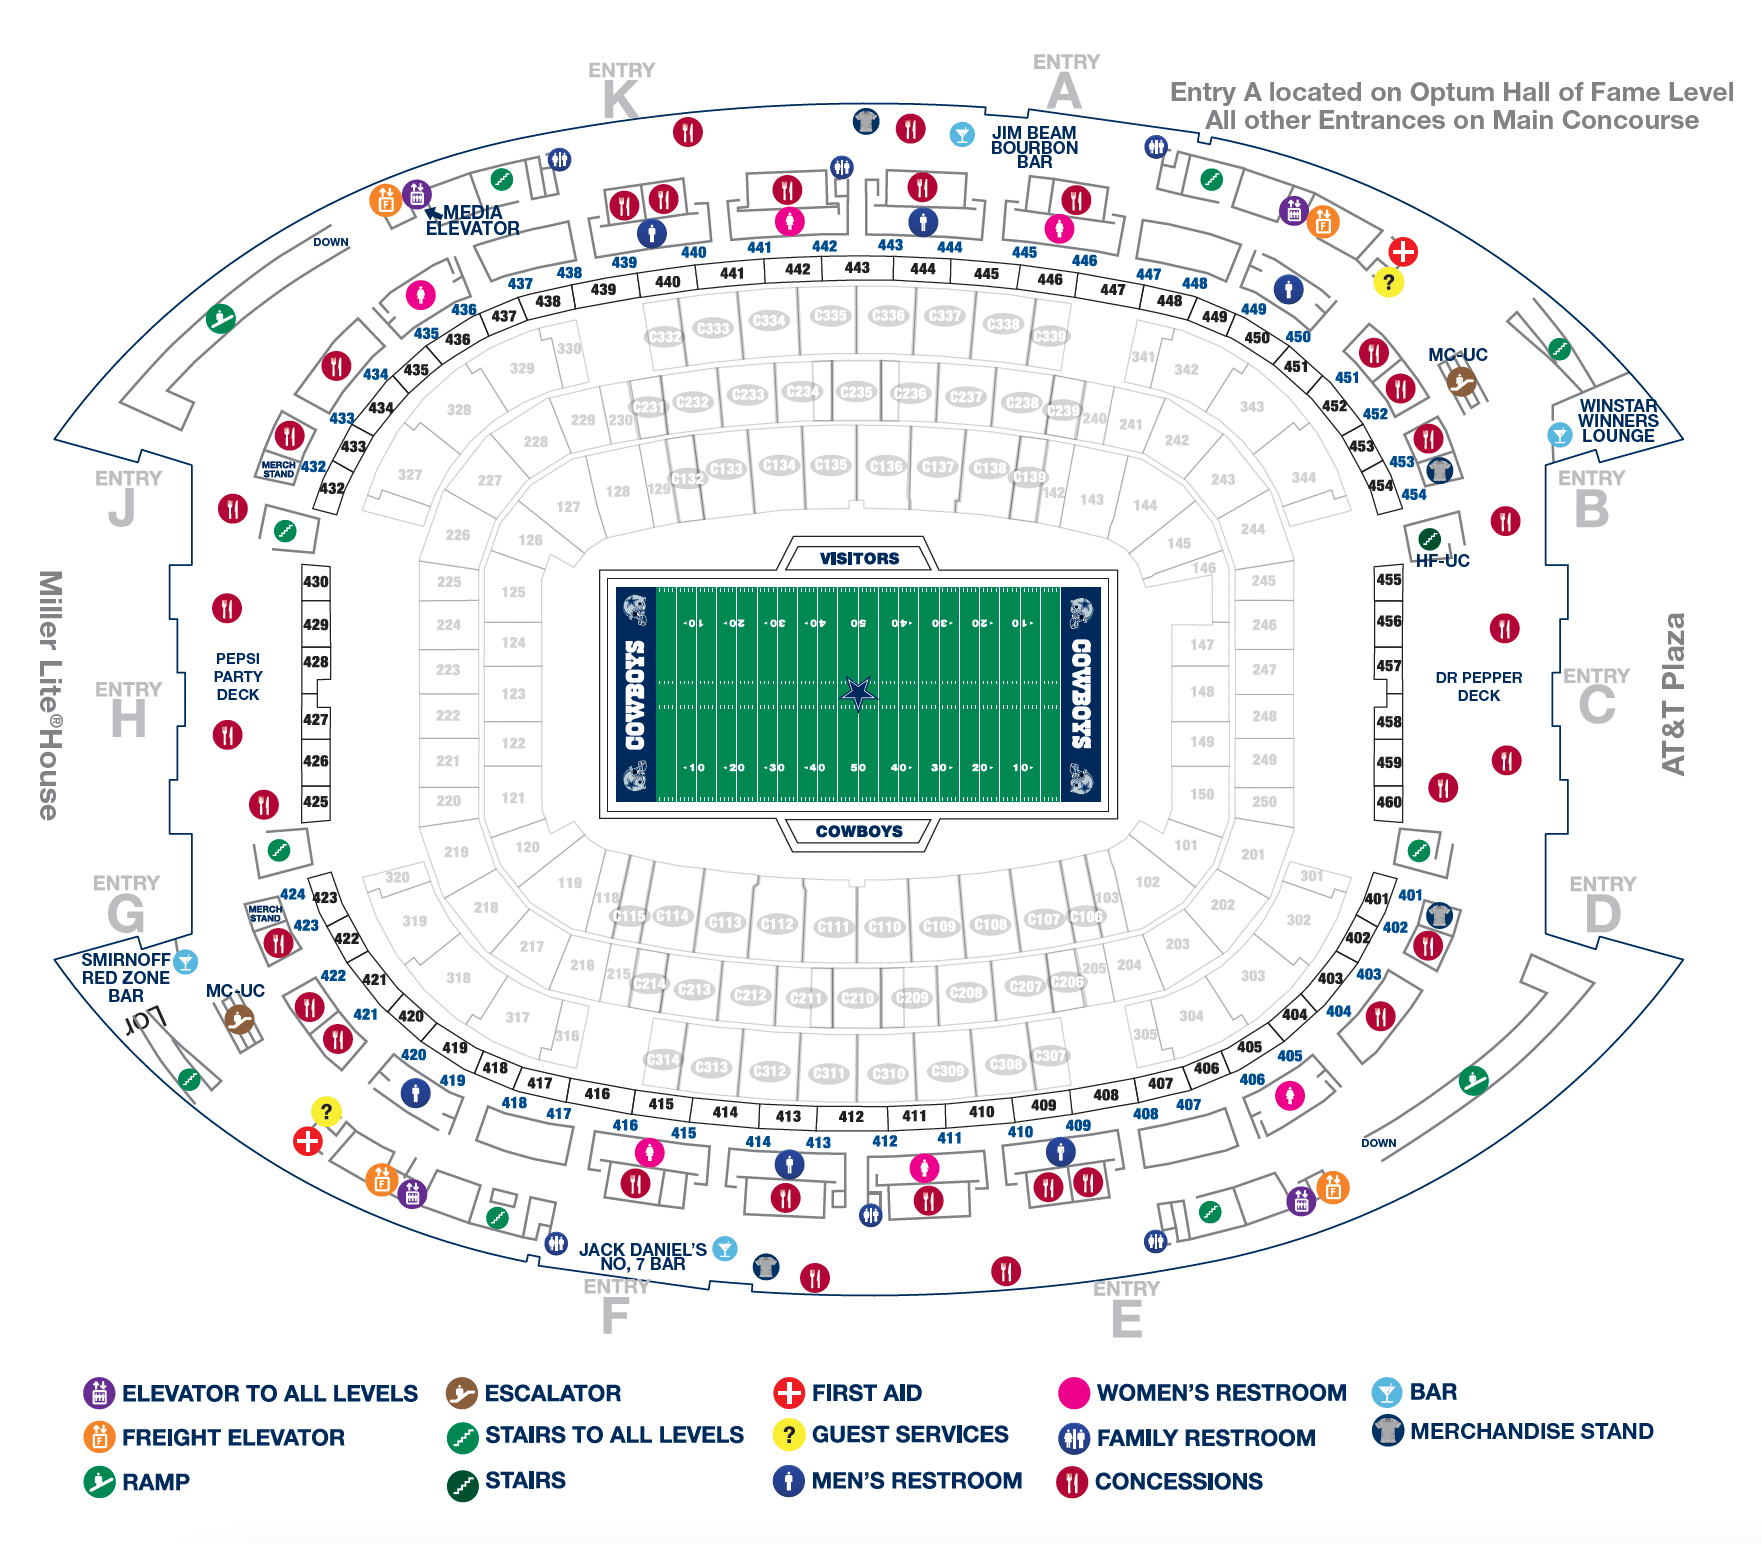 at&t center map